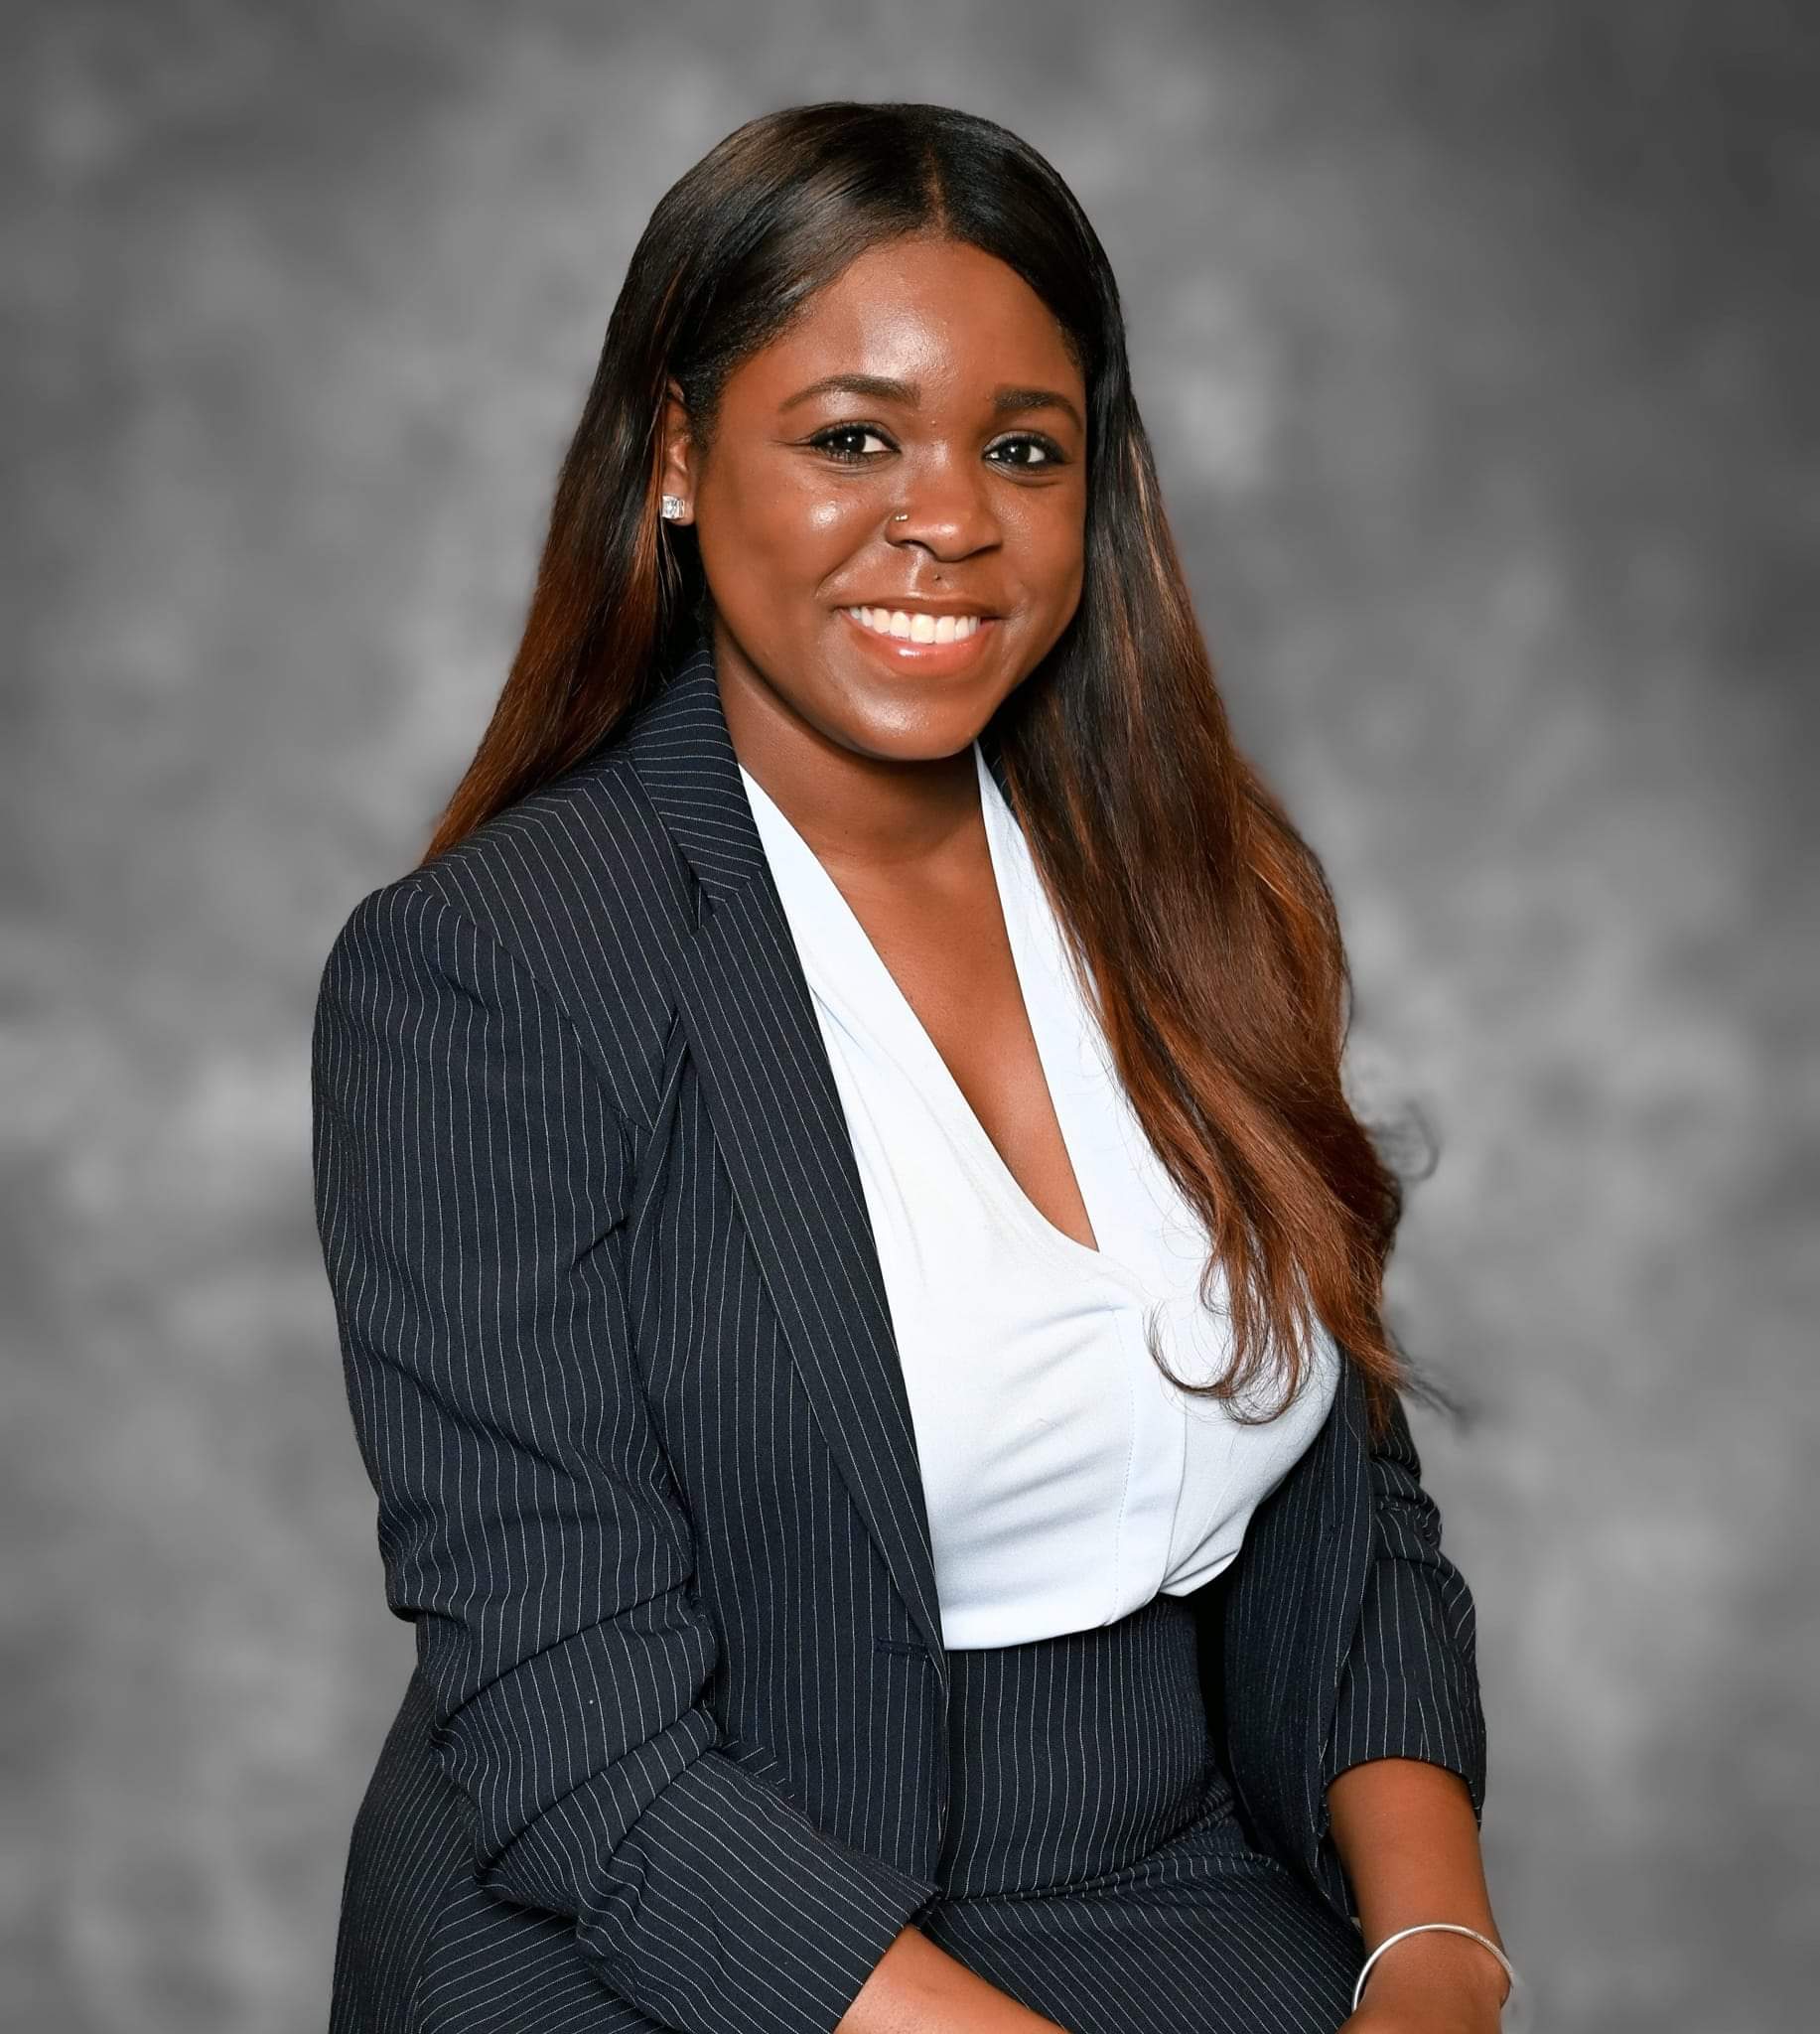 A young woman in a business suit smiling.